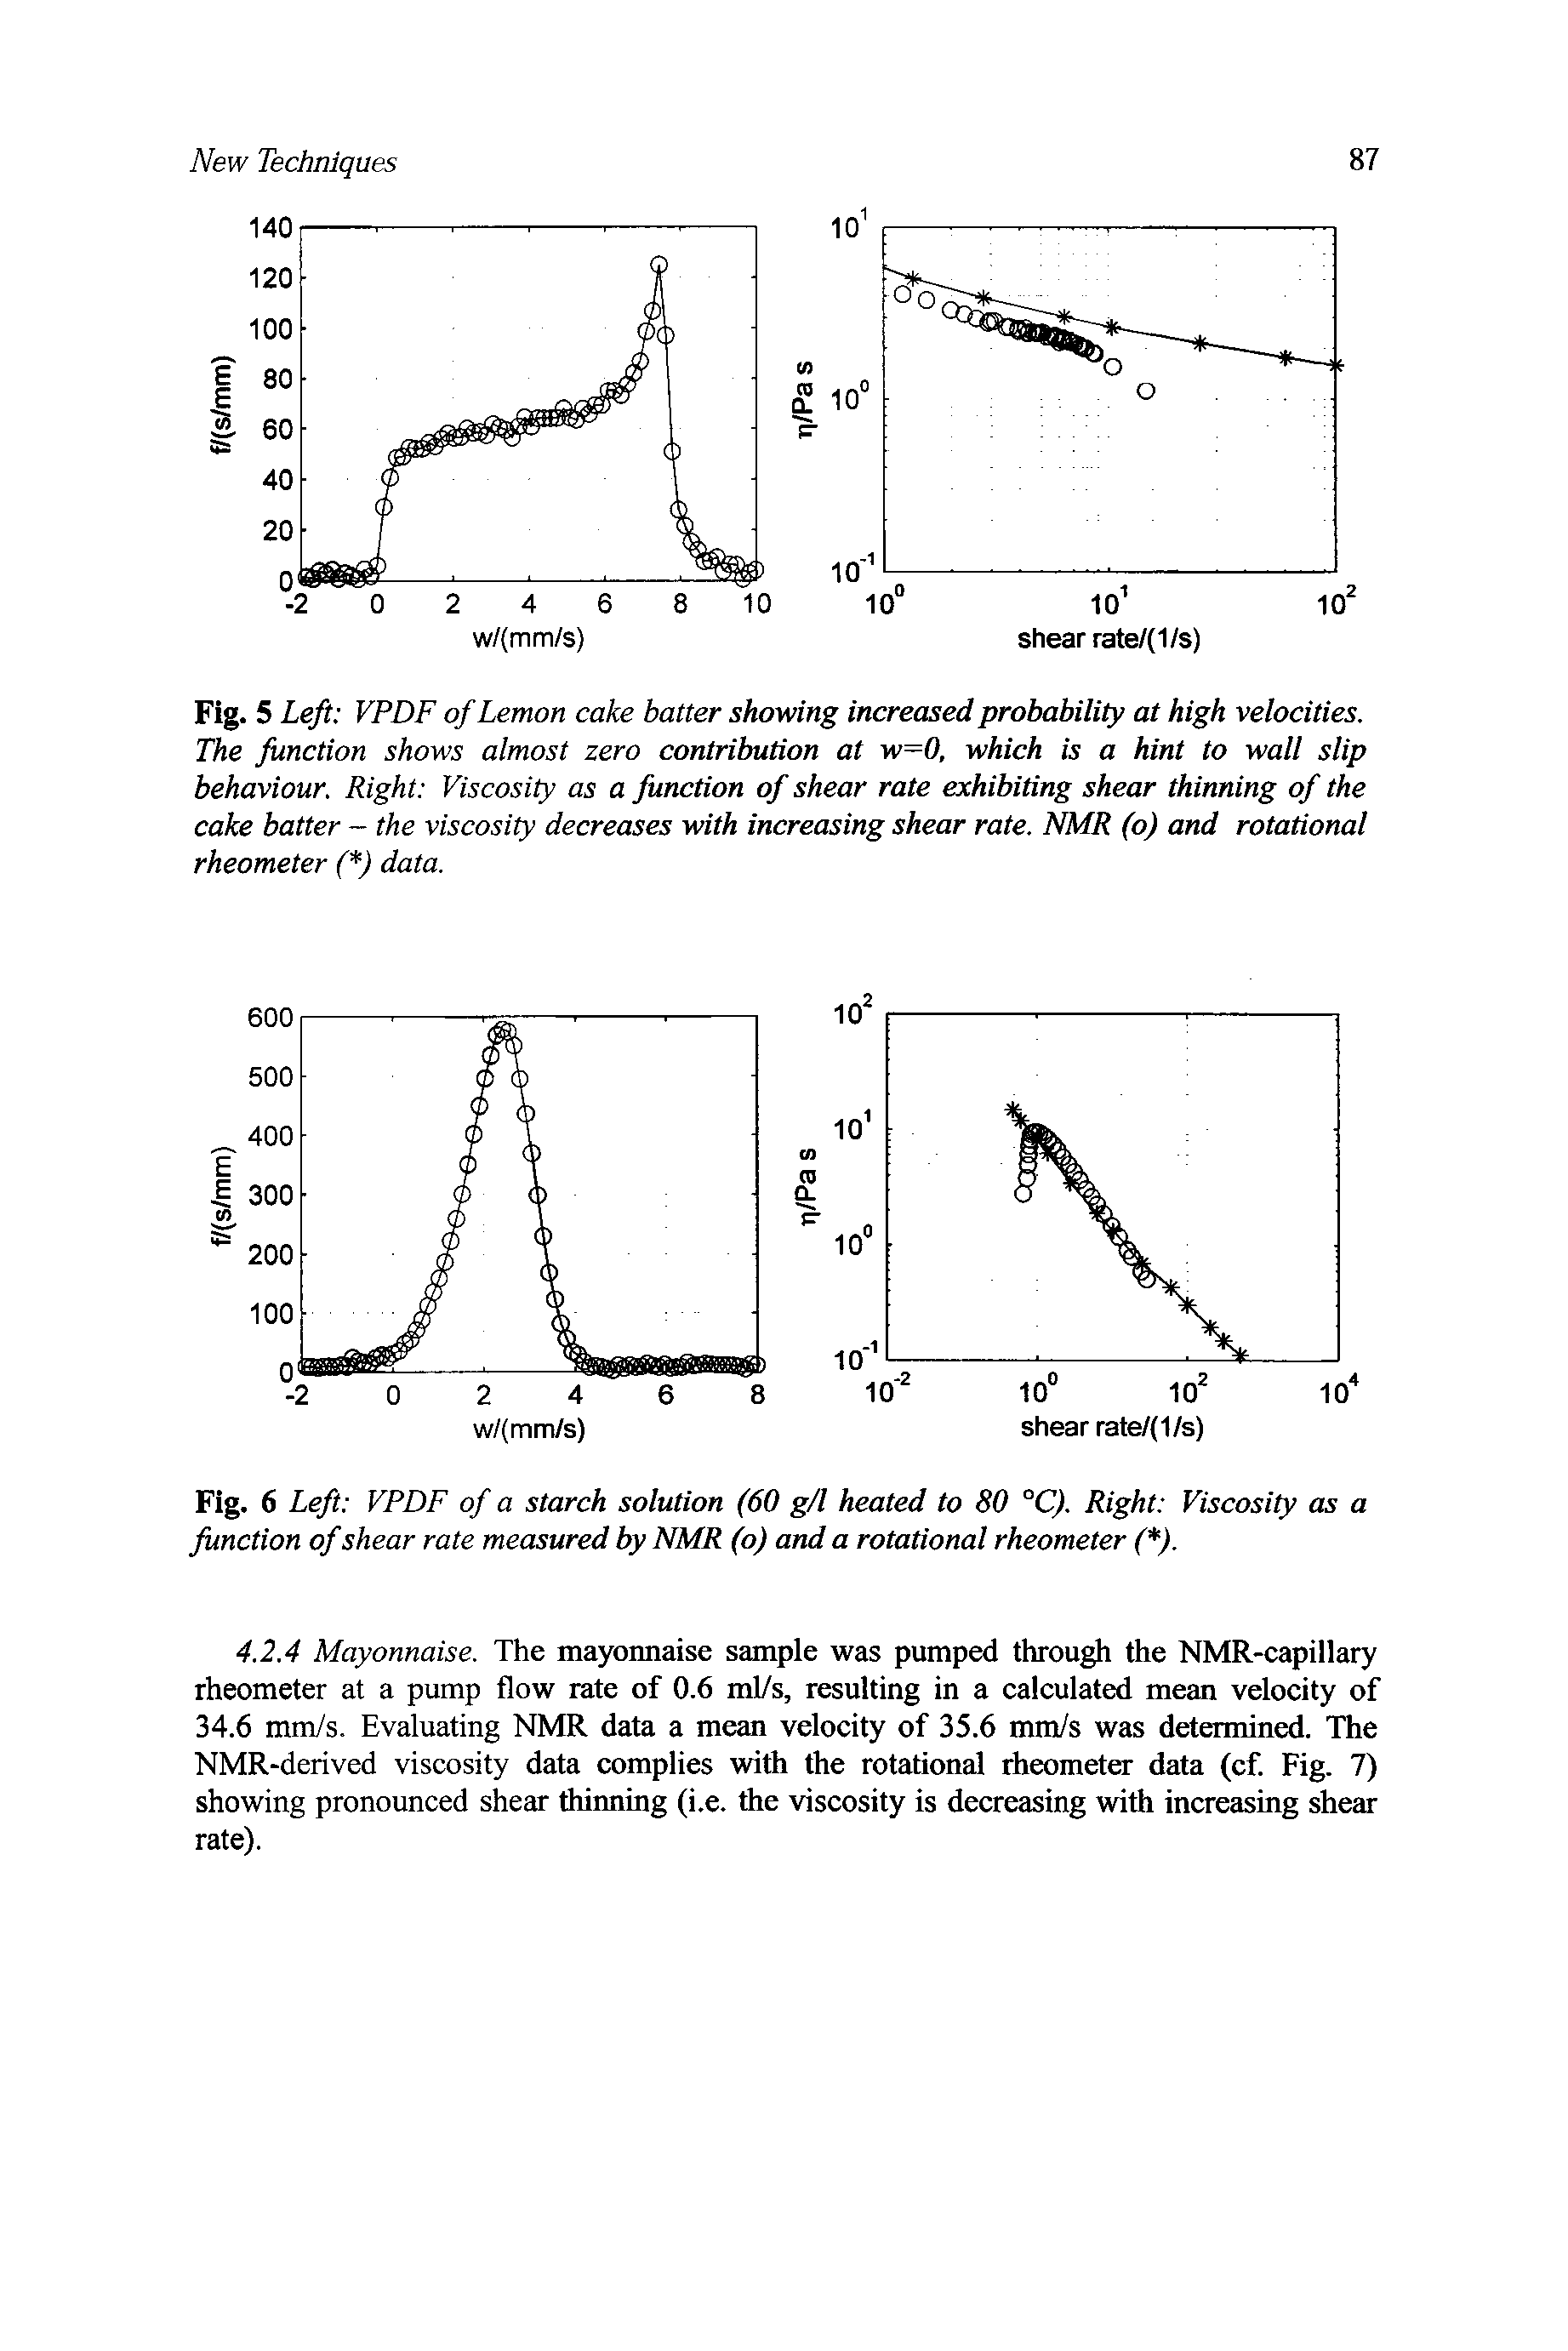 Fig. 5 Left VPDF of Lemon cake batter showing increased probability at high velocities. The function shows almost zero contribution at w=0, which is a hint to wall slip behaviour. Right Viscosity as a function of shear rate exhibiting shear thinning of the cake batter - the viscosity decreases with increasing shear rate. NMR (o) and rotational rheometer ( ) data.